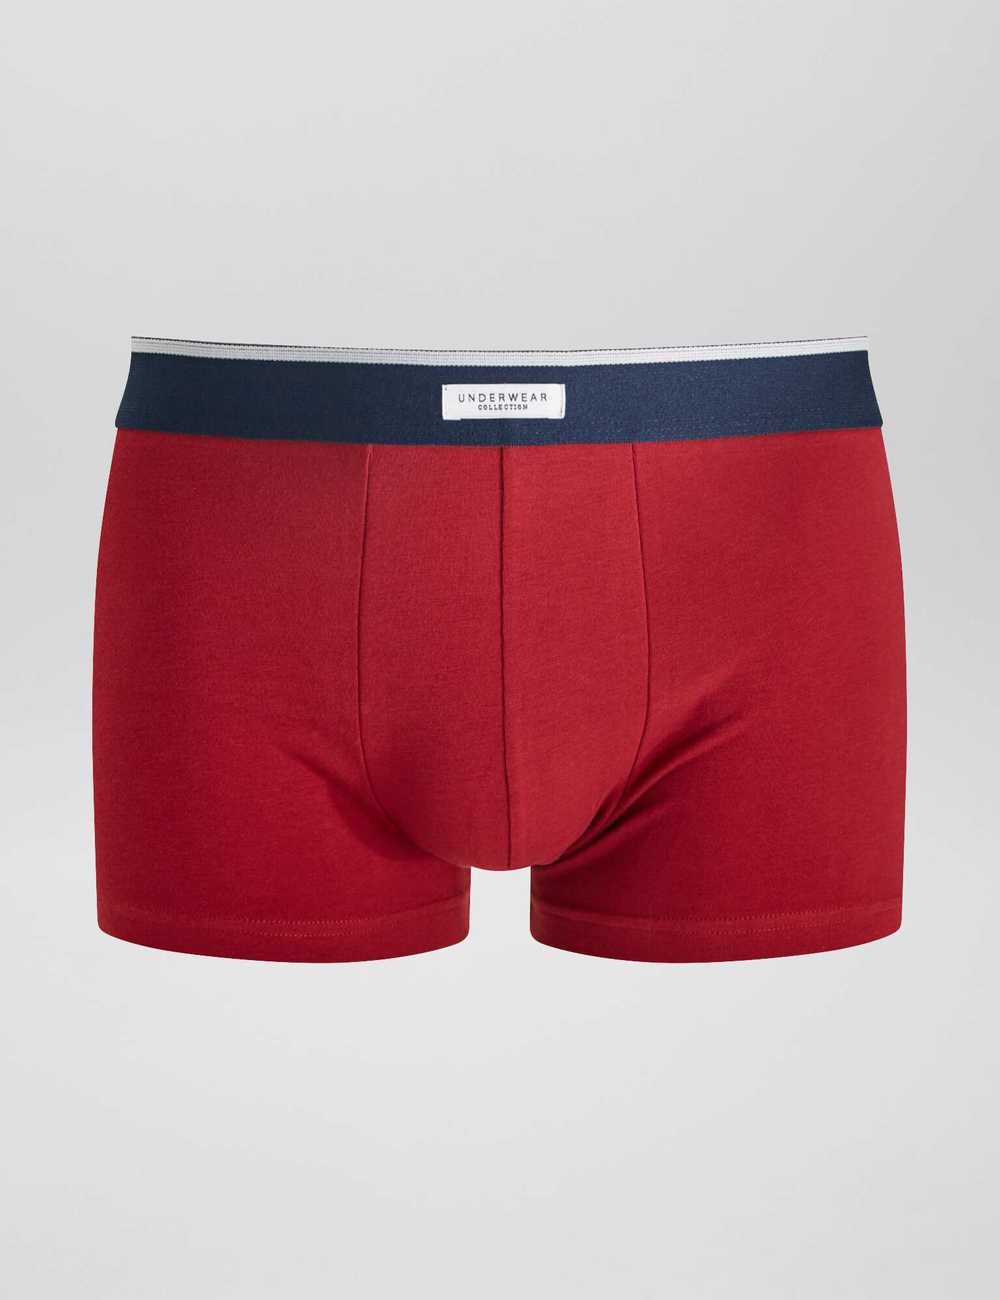 Buy Pack of 3 pairs of stretch boxer shorts Online in Dubai & the UAE|Kiabi